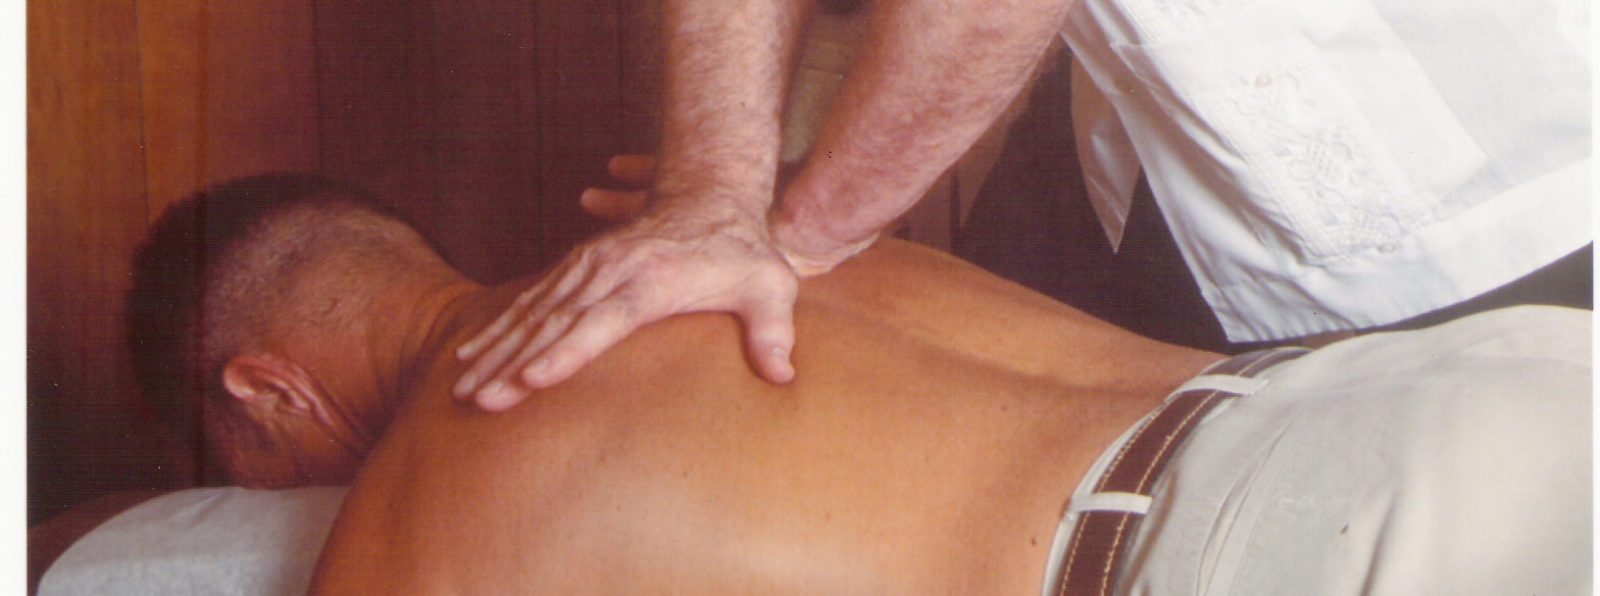 Spinal Manipulation, Chiropractic, and Subluxation Theory